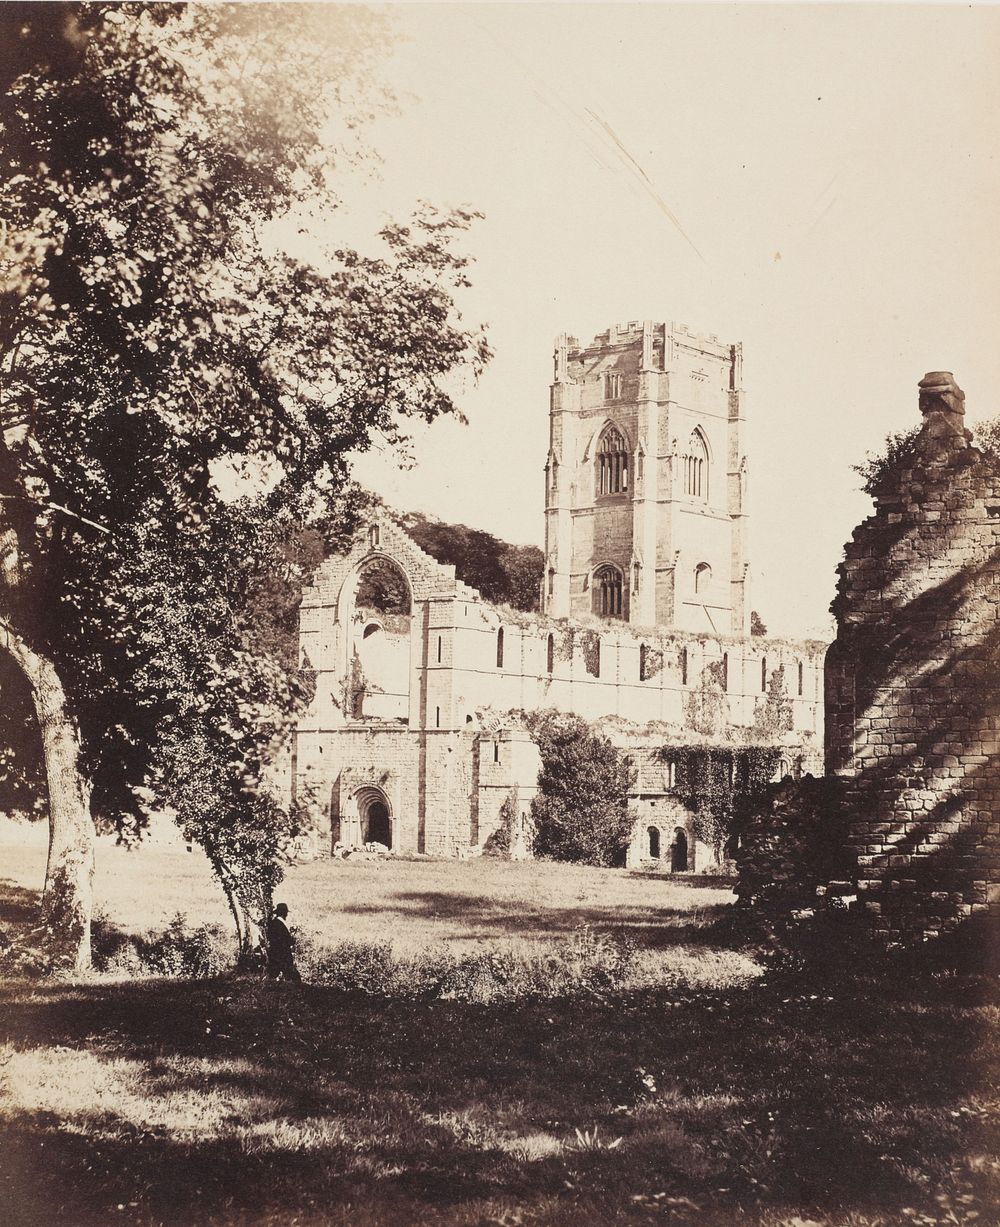 Fountains Abbey, The Church, Cloister and Hospitium. From the album: A photographic tour among the Abbeys of Yorkshire;…